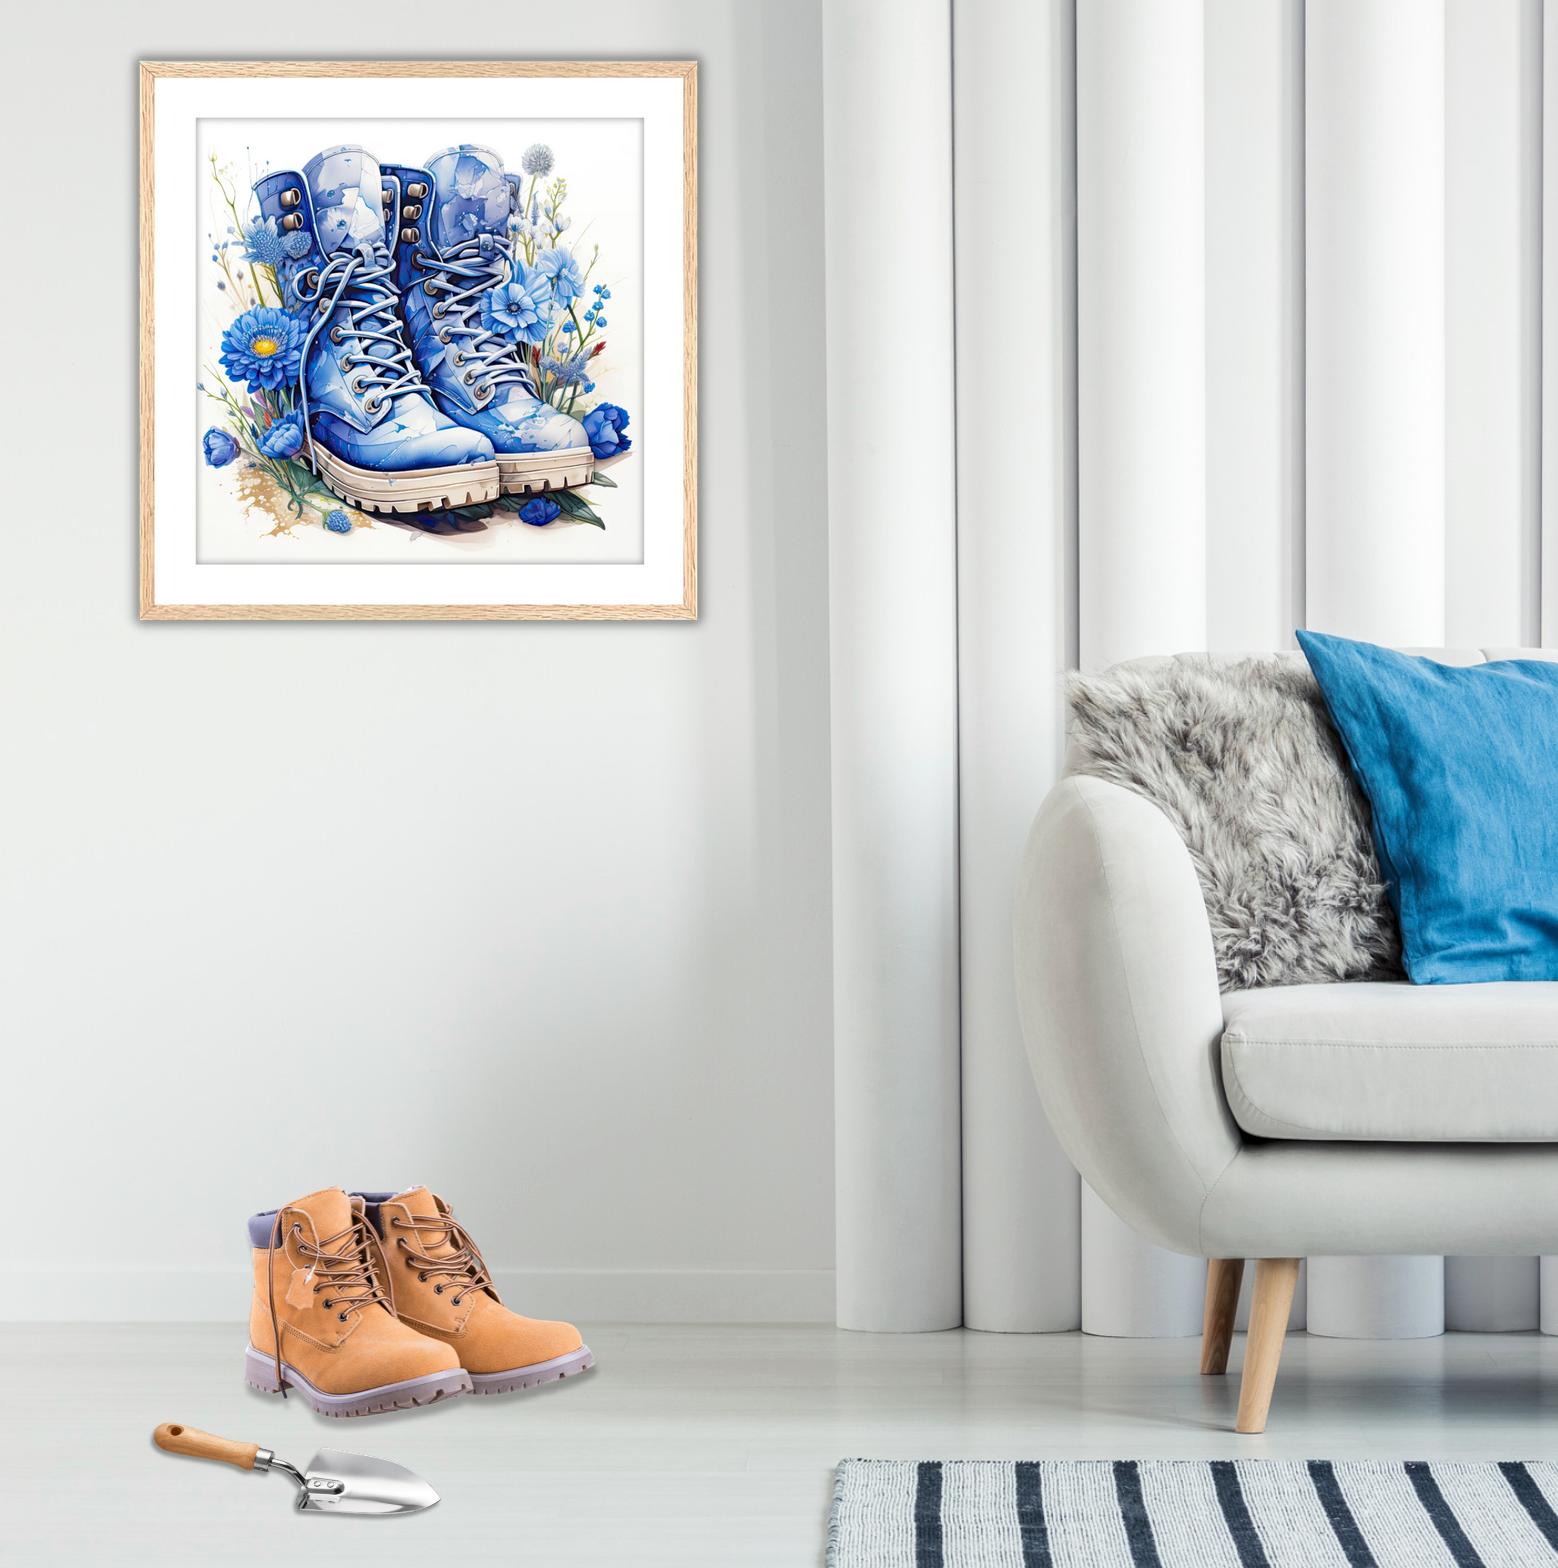 Adorable Framed Fine Art Print on display in a modern living room. The artwork features watercolor style blue hiking boots surrounded in blue wildflowers. A great gift for women hiking or gardening enthusiasts. Art comes with white mat and oak frame. This wall art is for sale at customconcepts.art